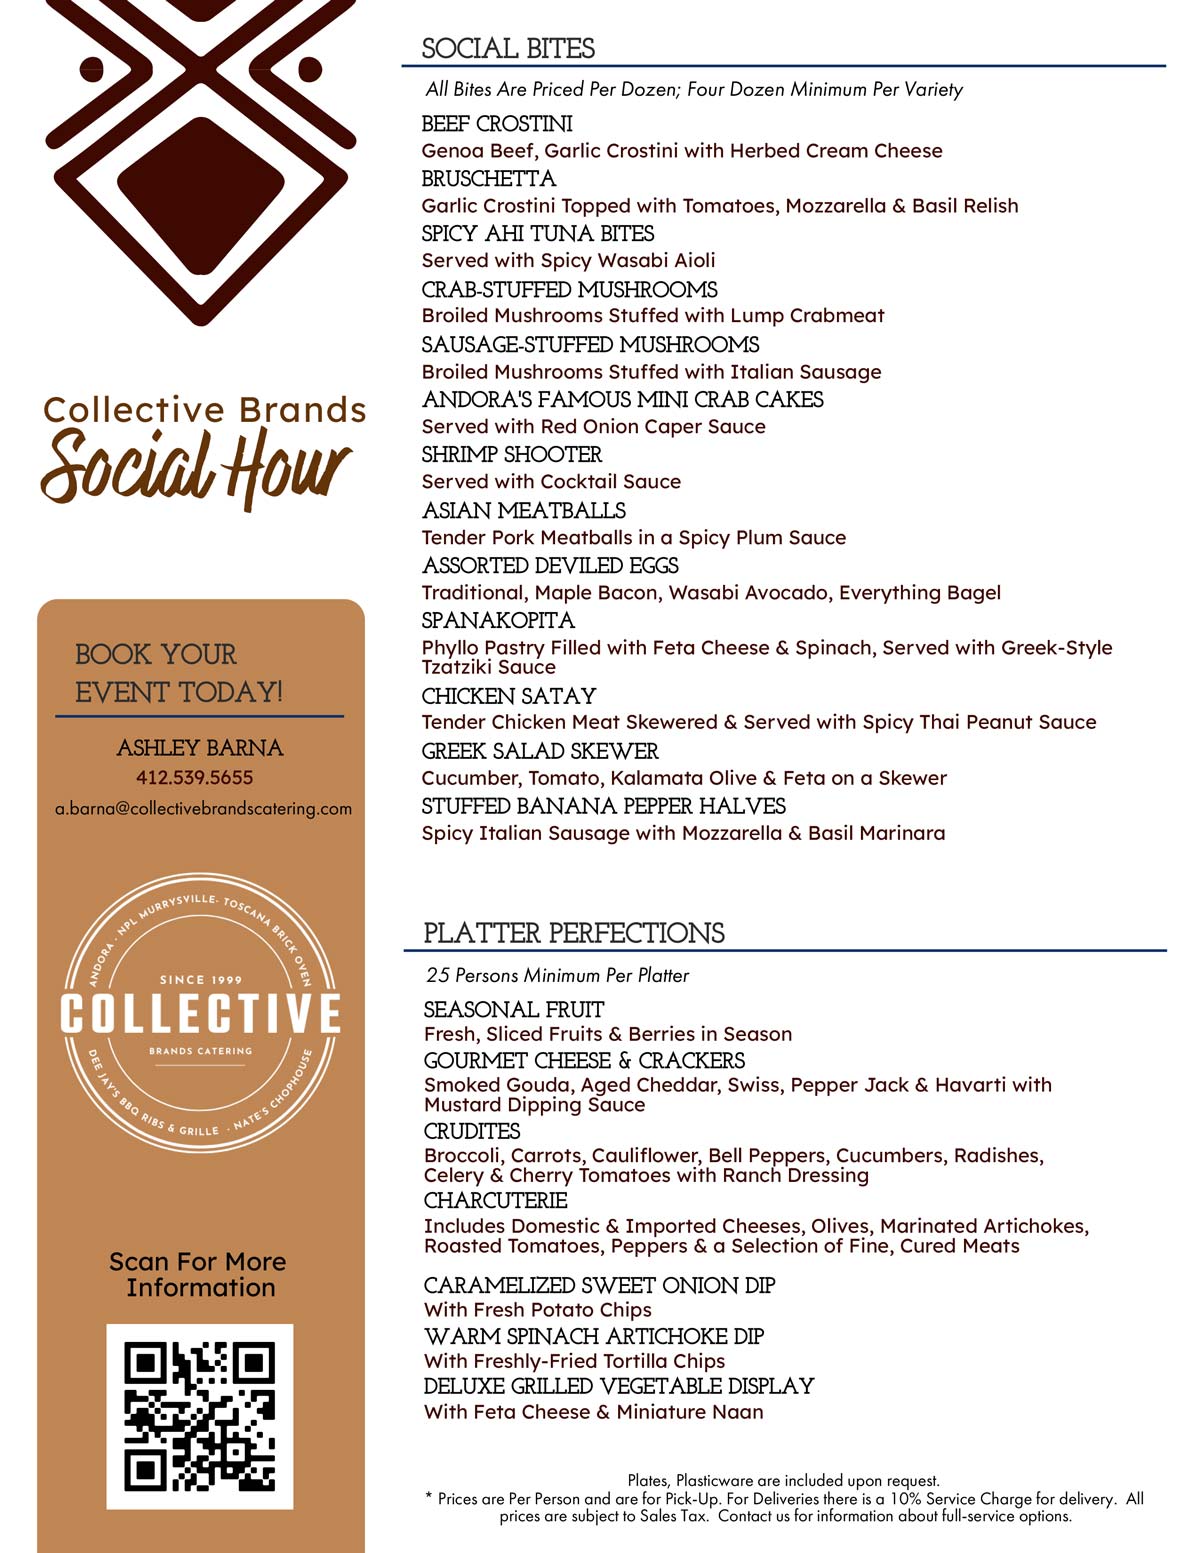 Page 1 of Collective Brands Catering menu for social events in Pennsylvania and West Virginia